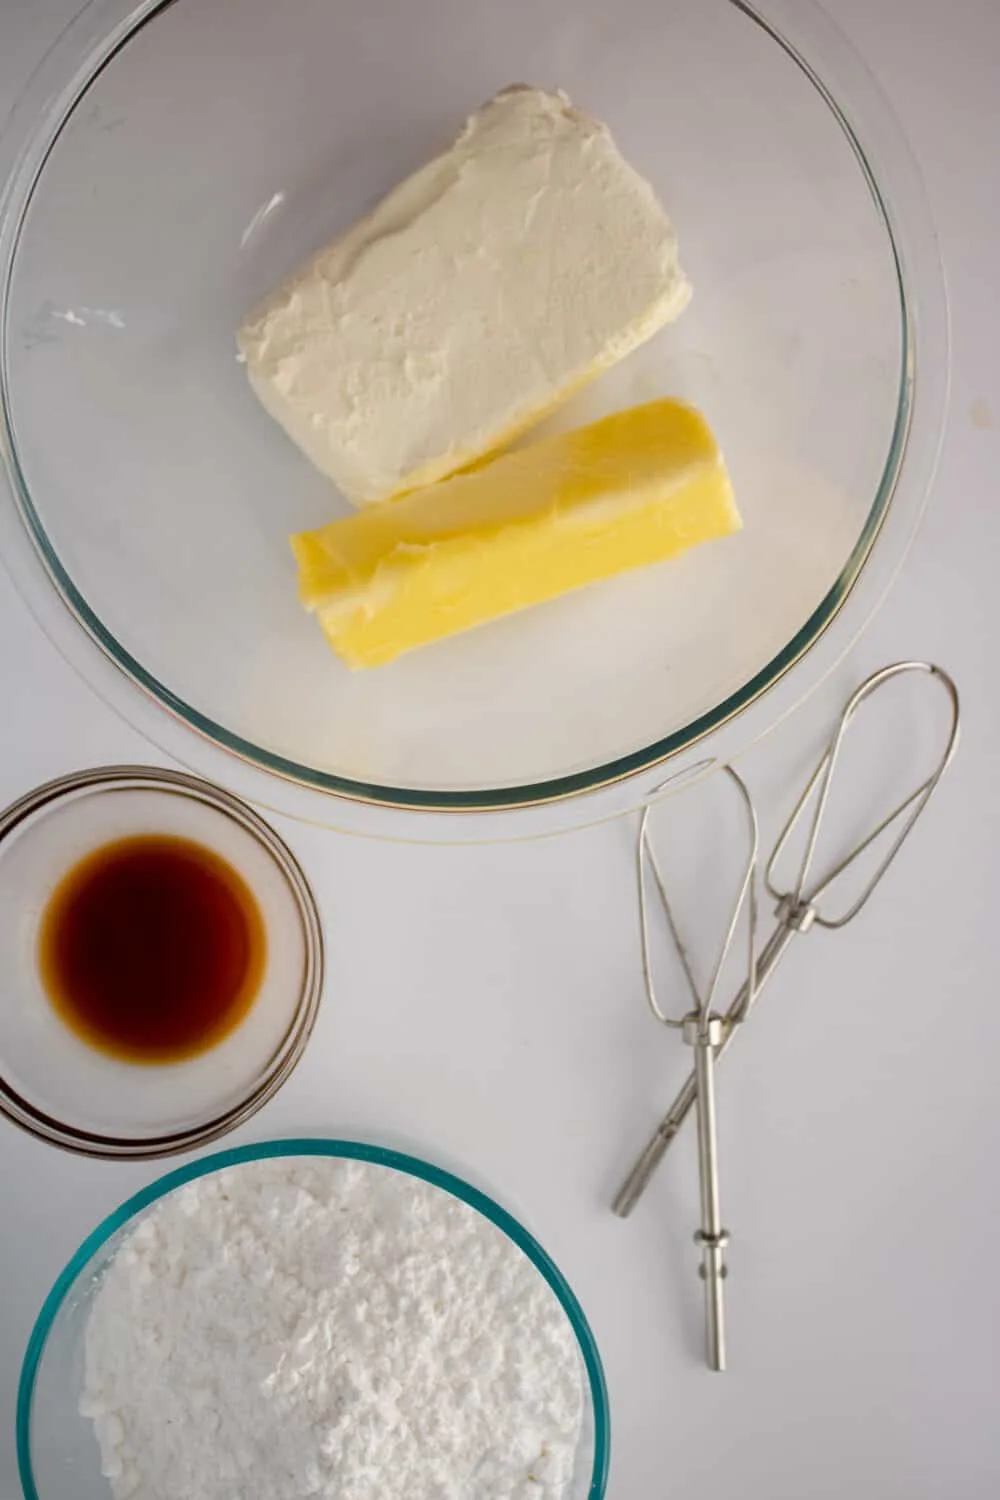 Ingredients to make cream cheese frosting